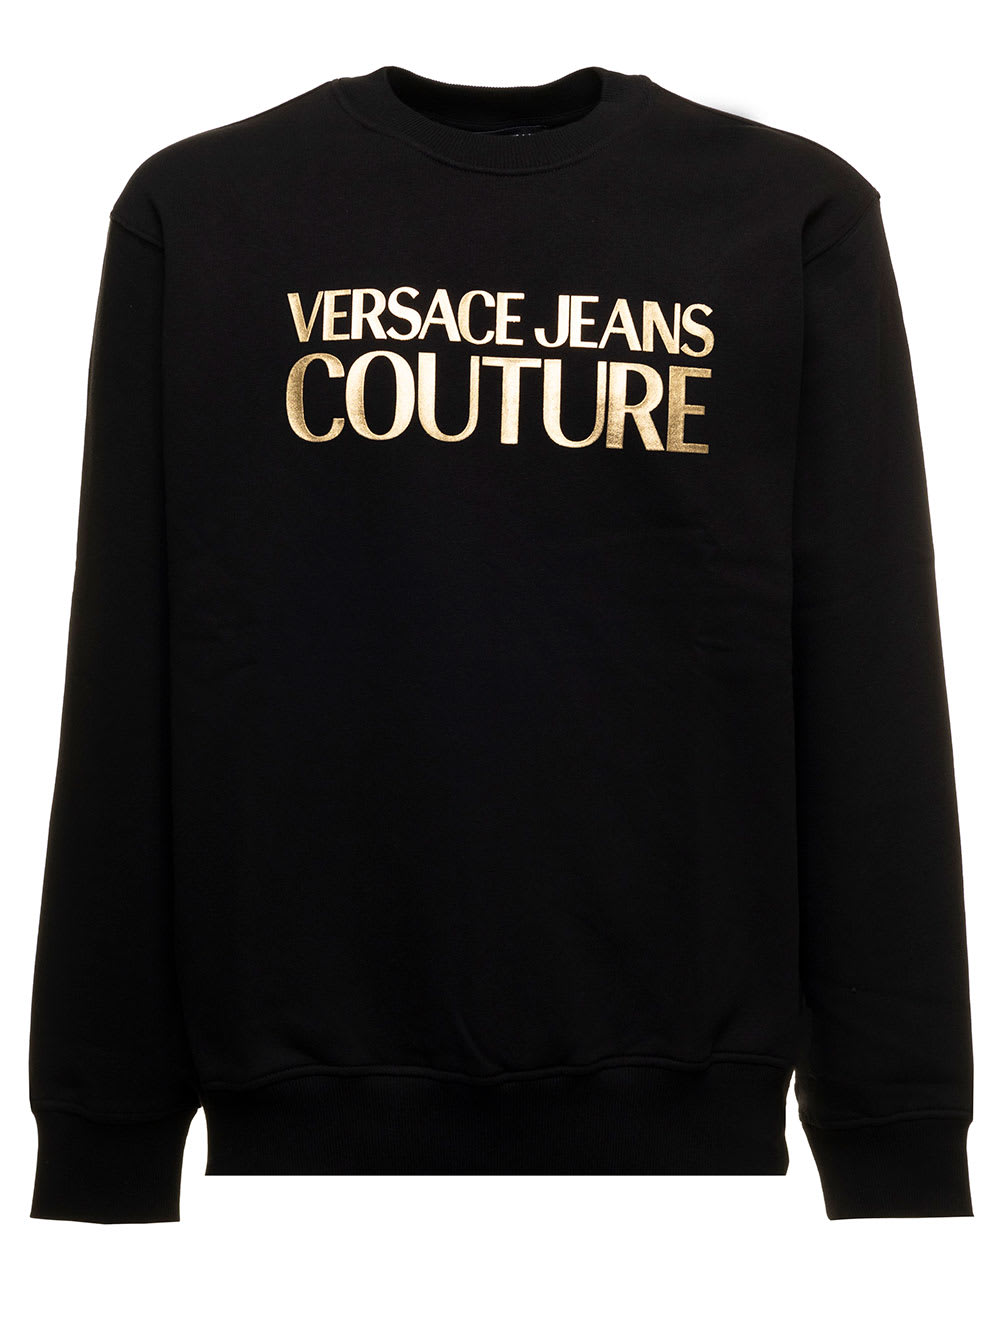 VERSACE JEANS COUTURE THICK FOIL BLACK COTTON SWEATSHIRT AND METALLIZED LOGO PRINT VERSAE JEANS COUTURE MAN